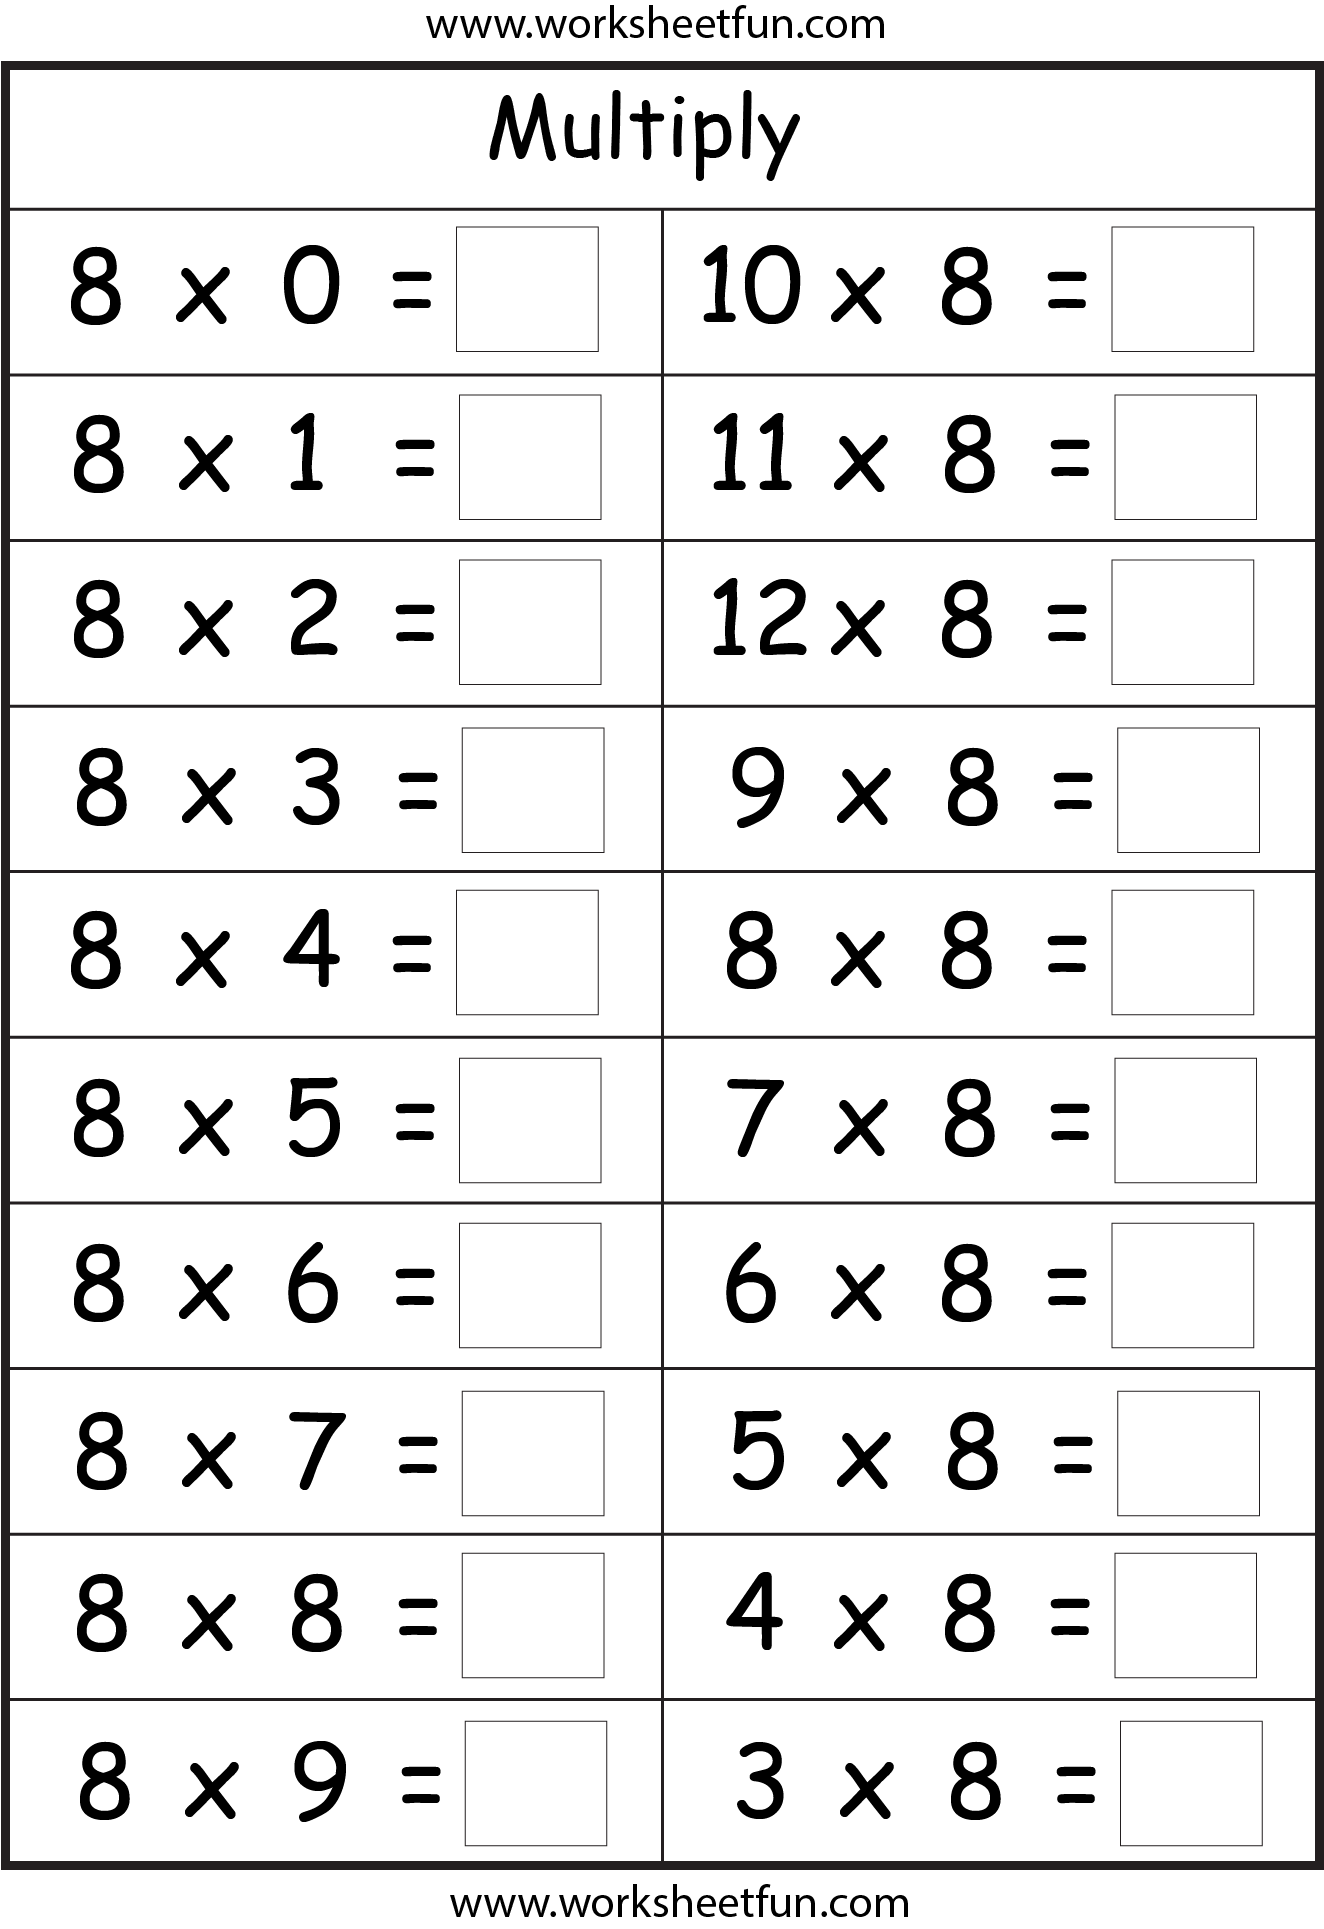 Multiplication Basic Facts – 2, 3, 4, 5, 6, 7, 8 &amp;amp; 9 Times